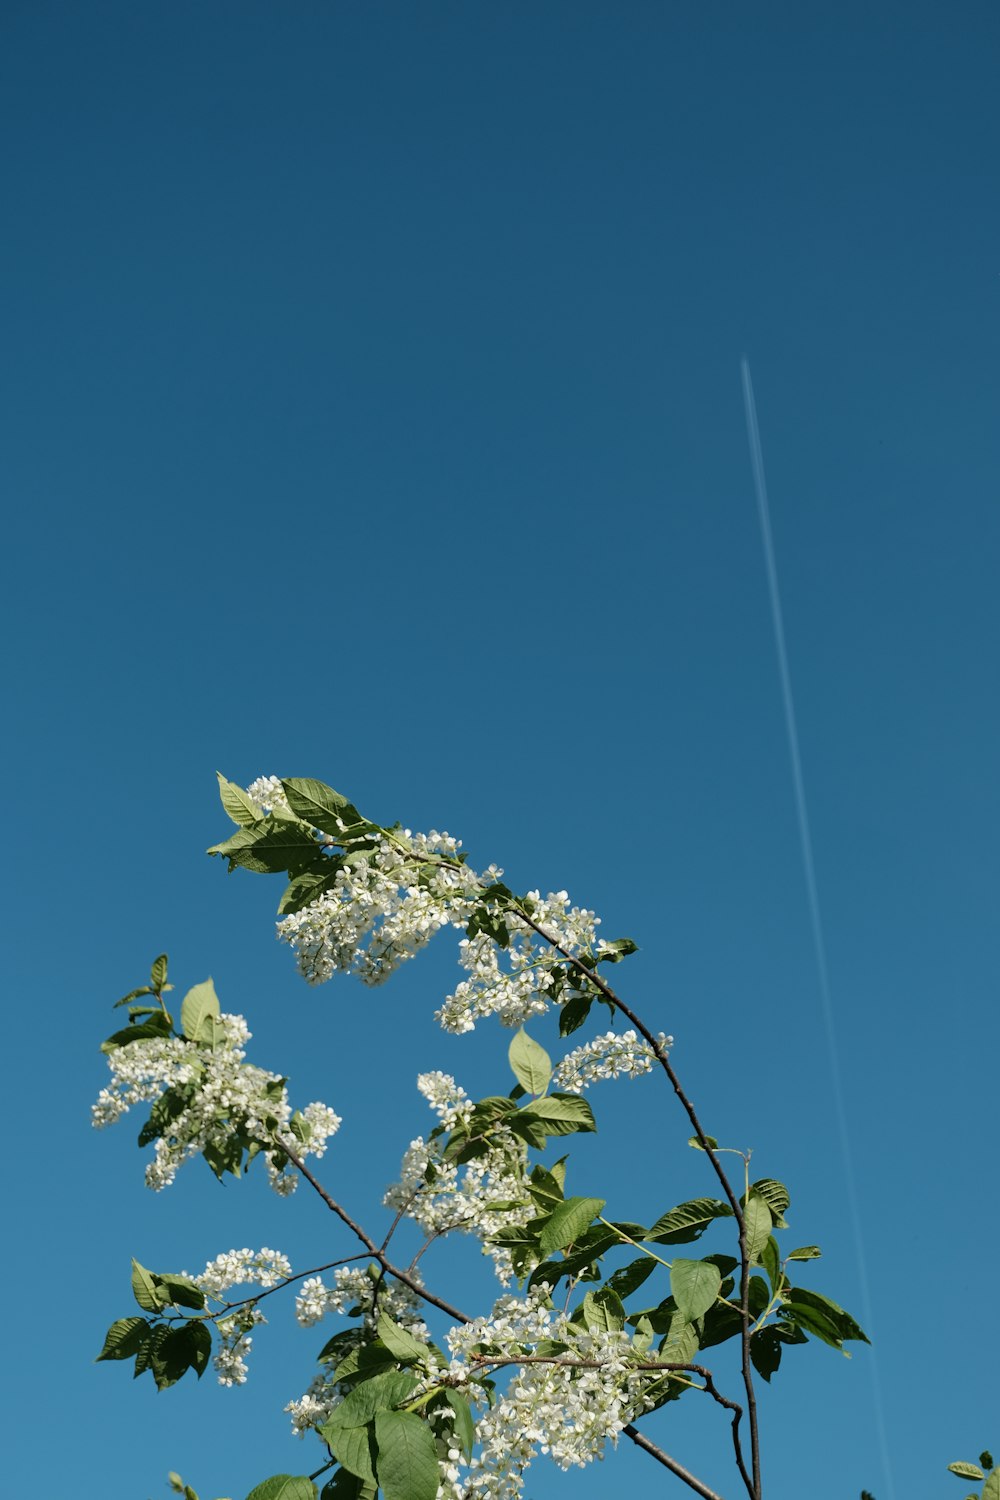 a tree with white flowers and an airplane in the sky